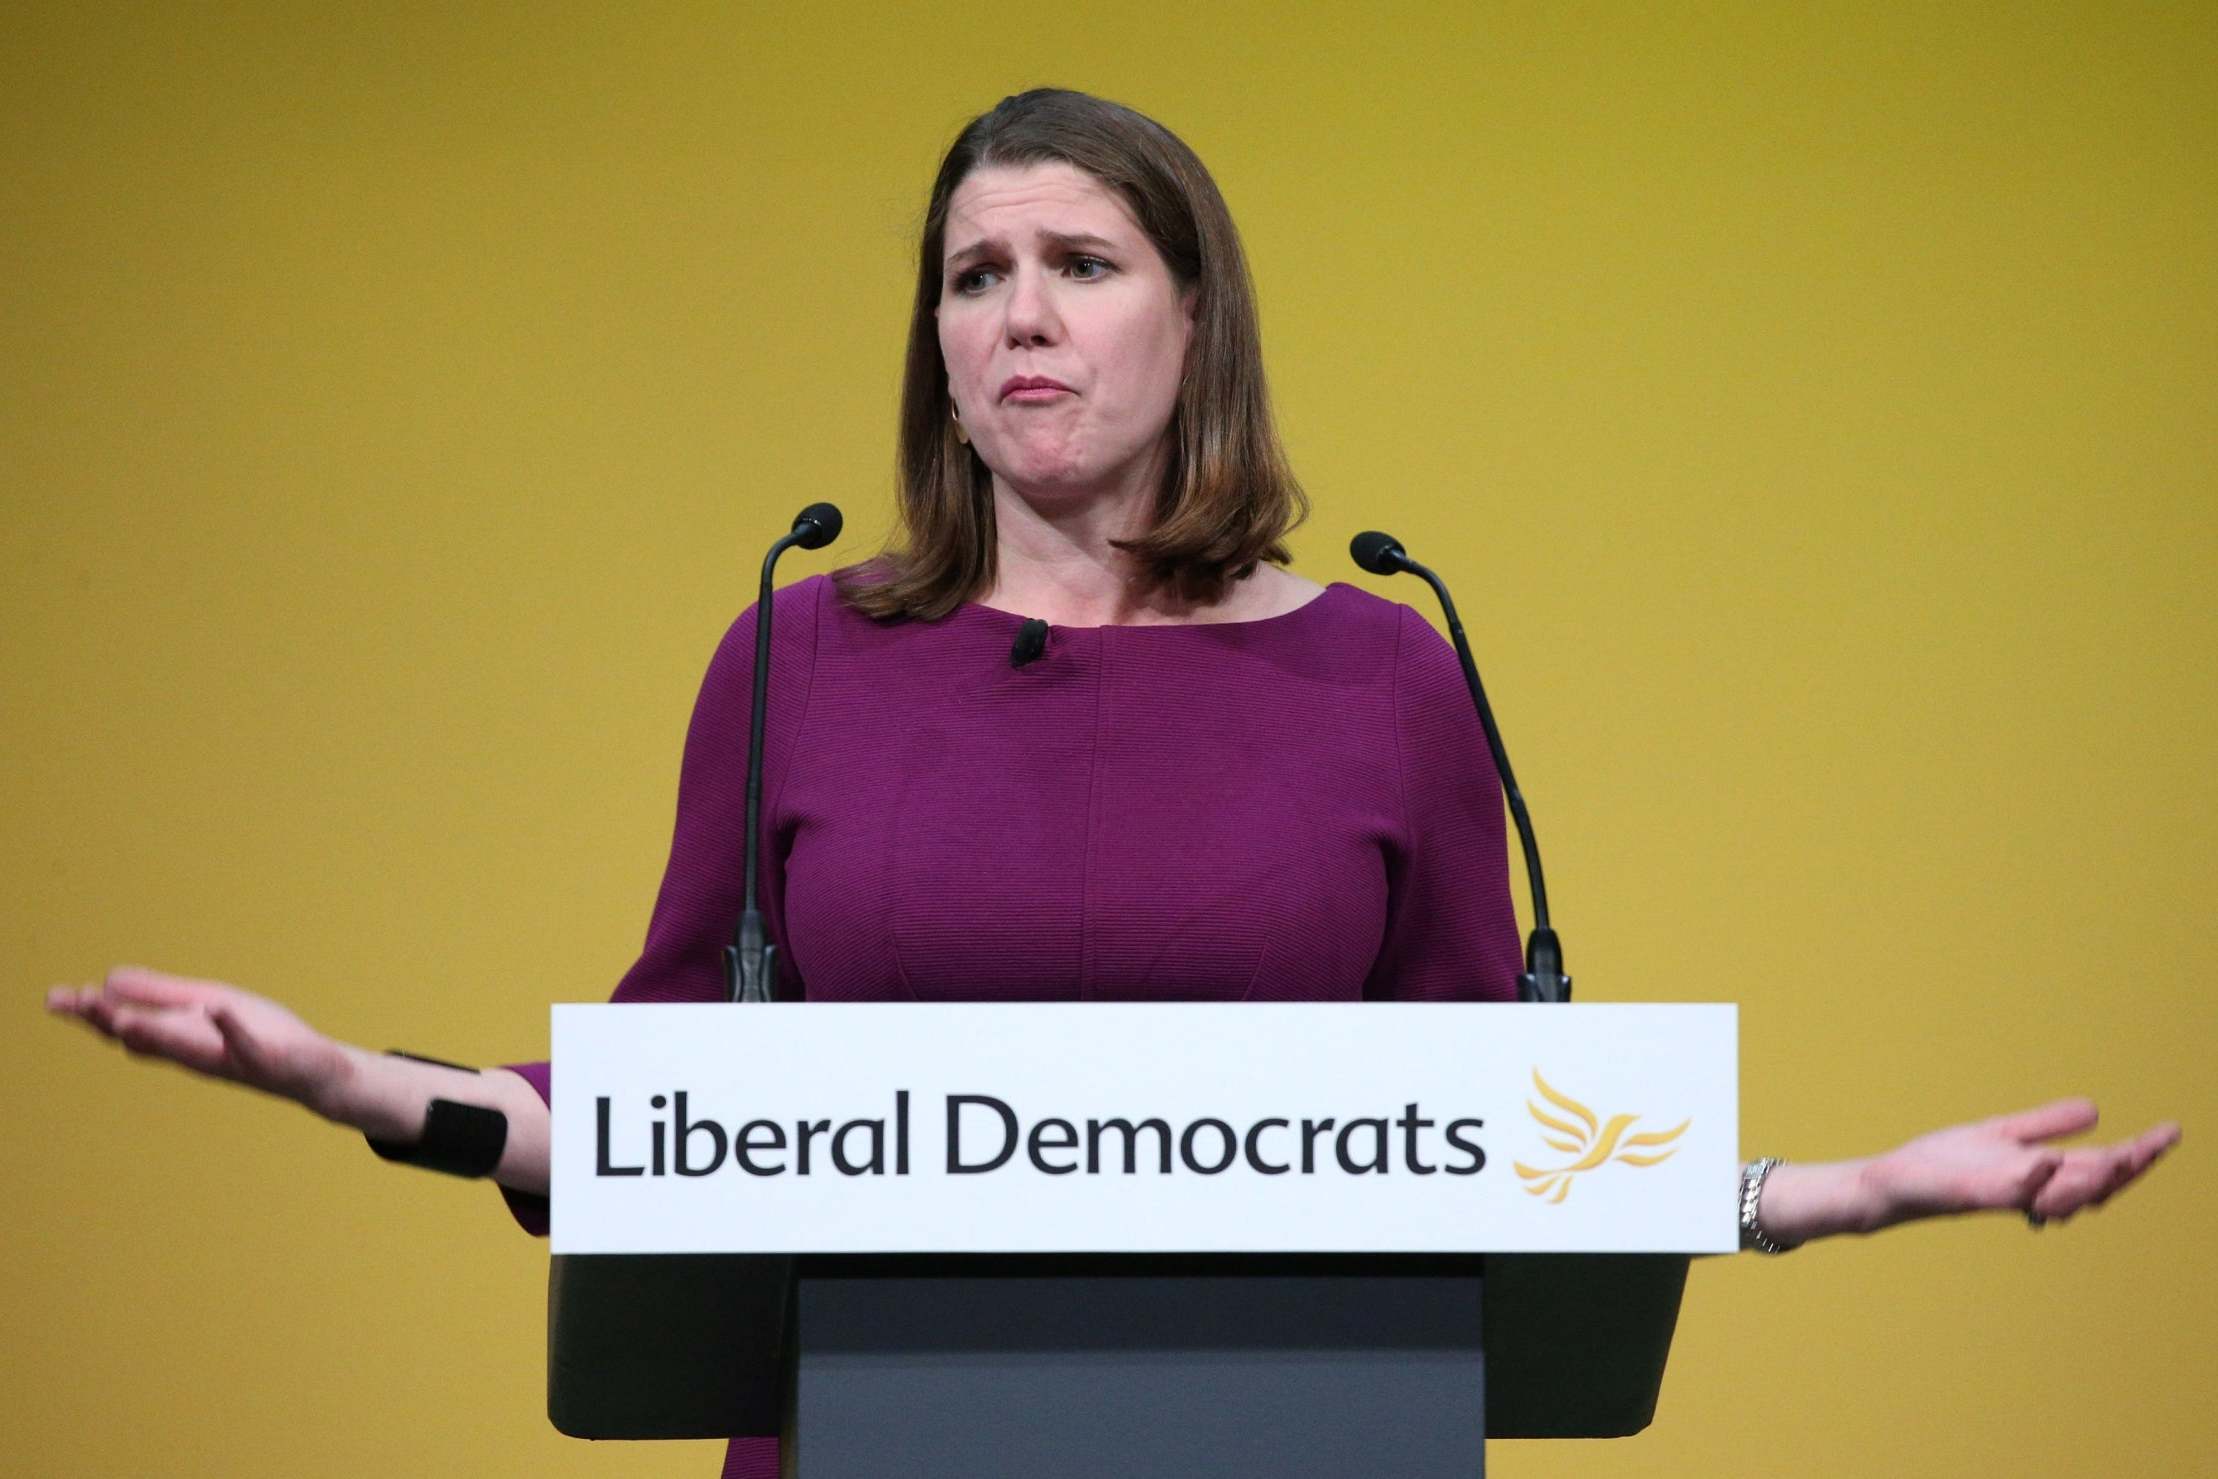 The response to the debate had been an integral part of the Liberal Democrat campaign since the debate was first announced